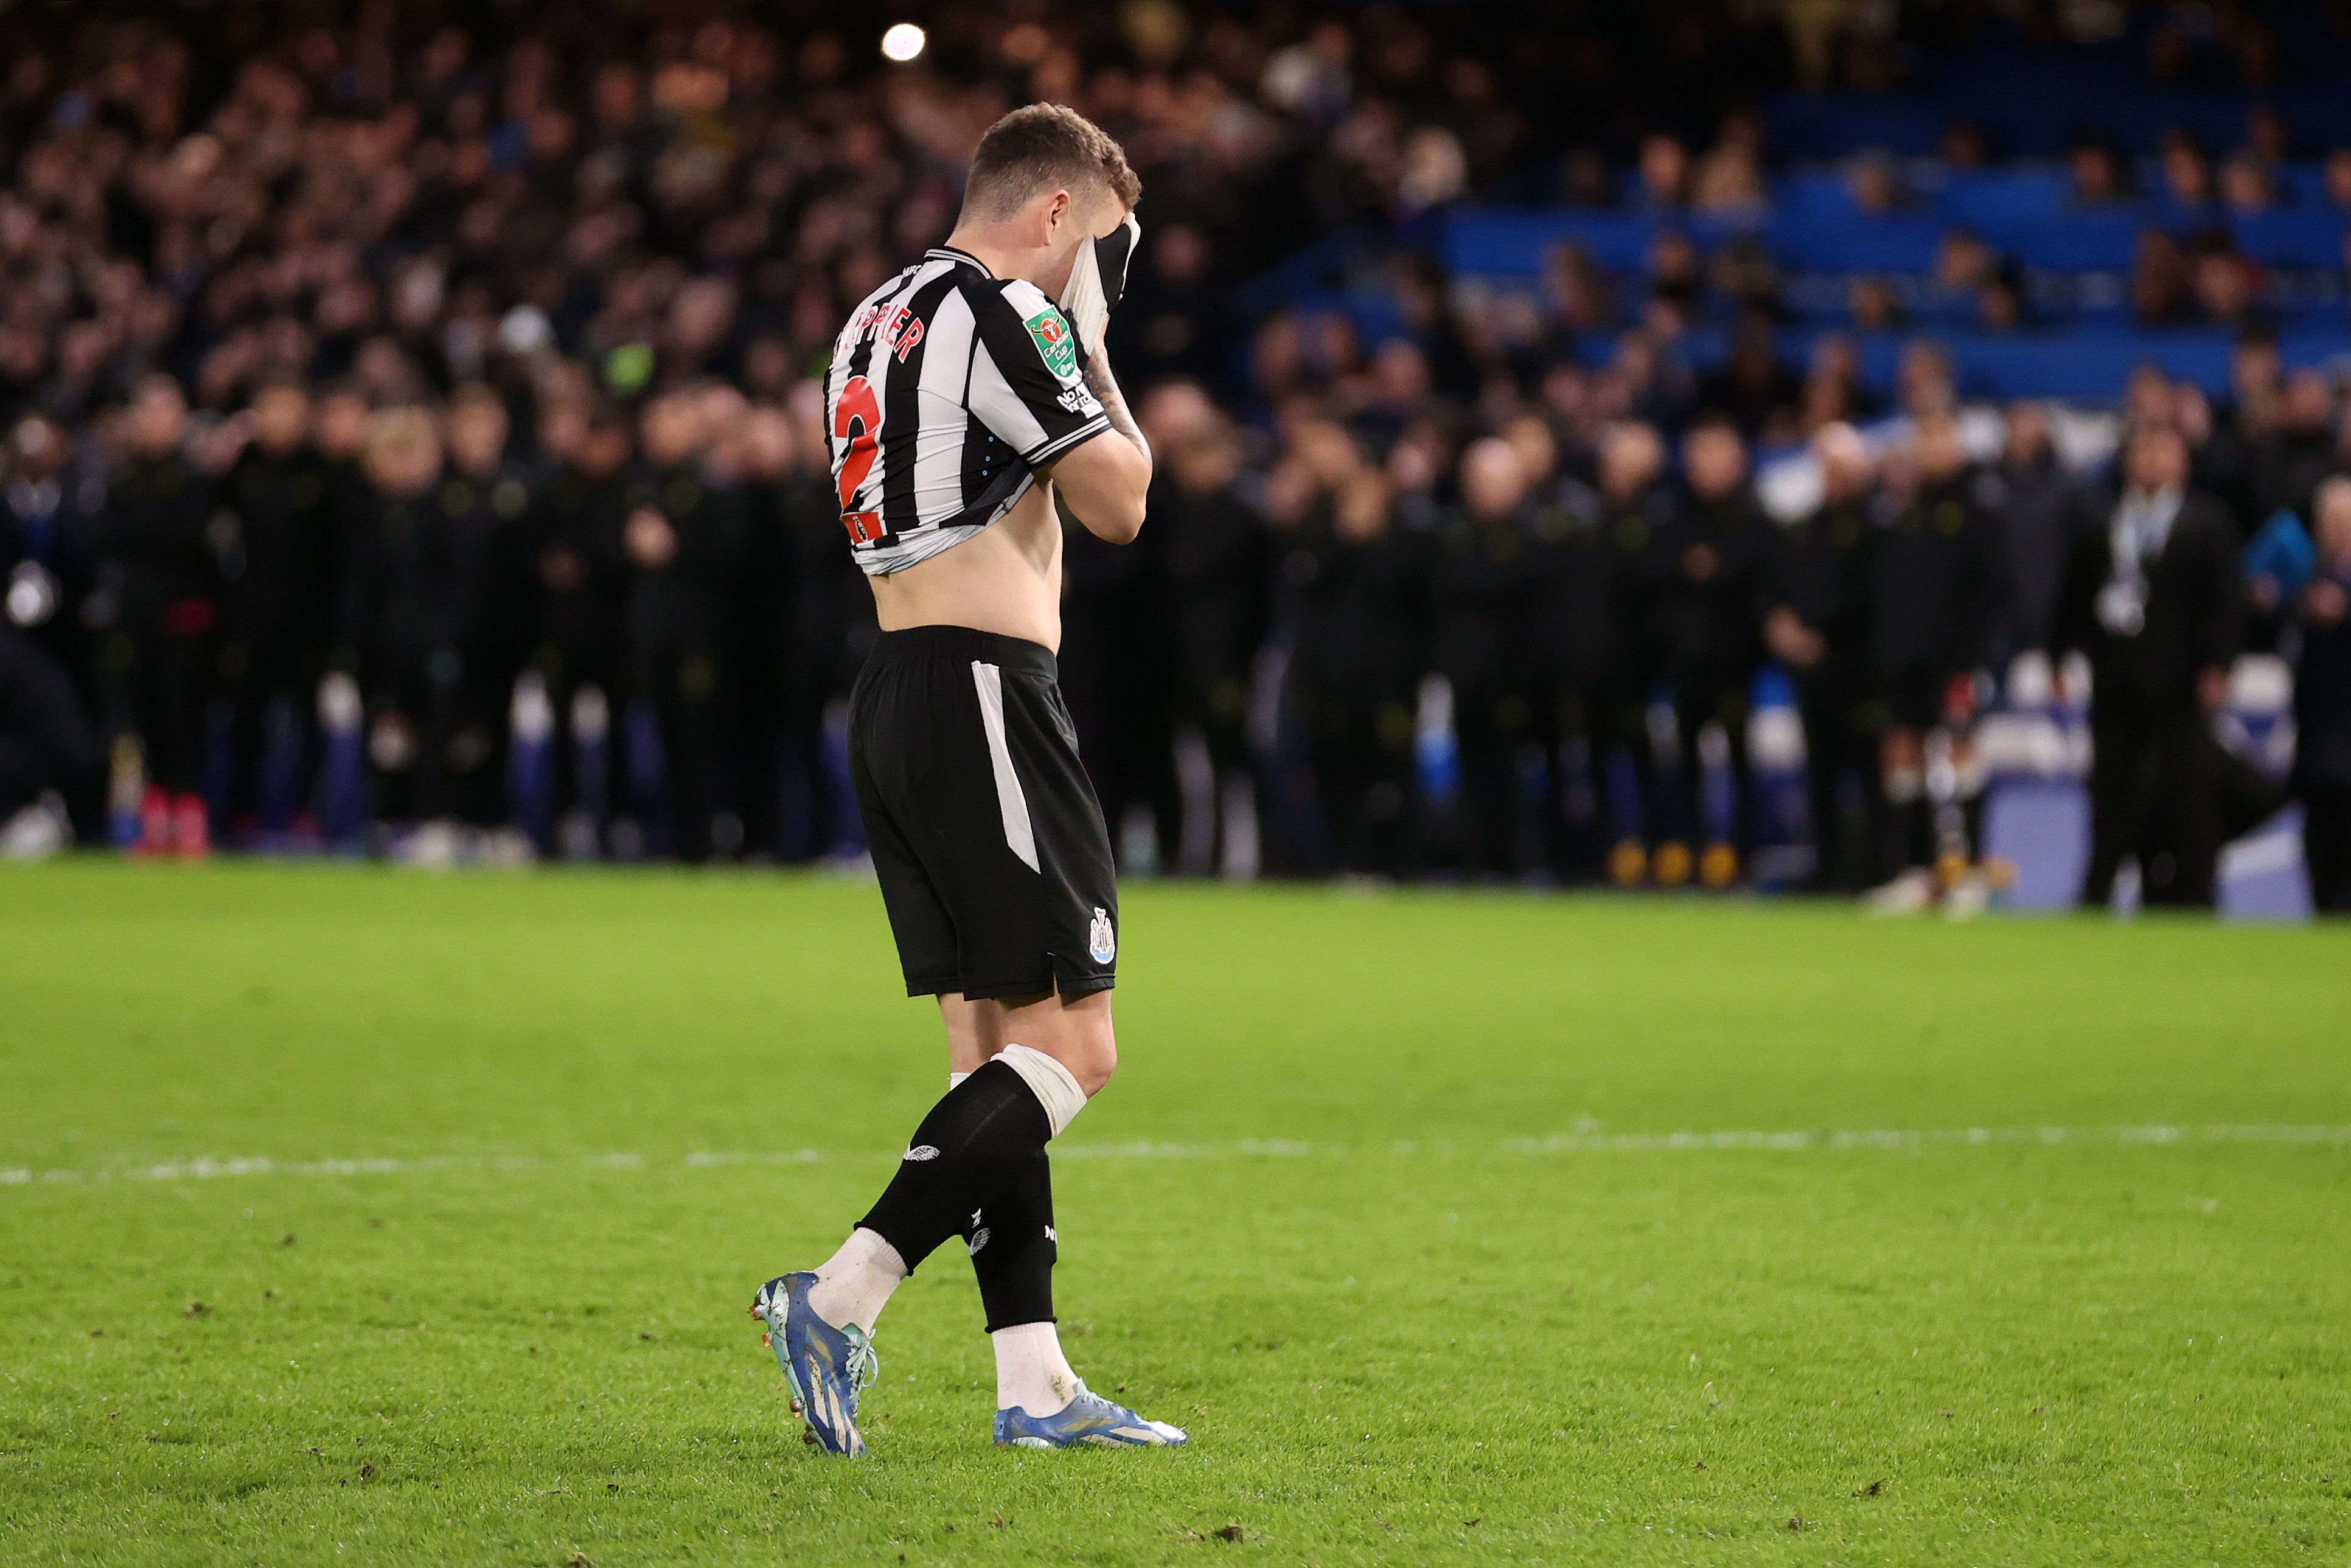 Newcastle have suffered a miserable month